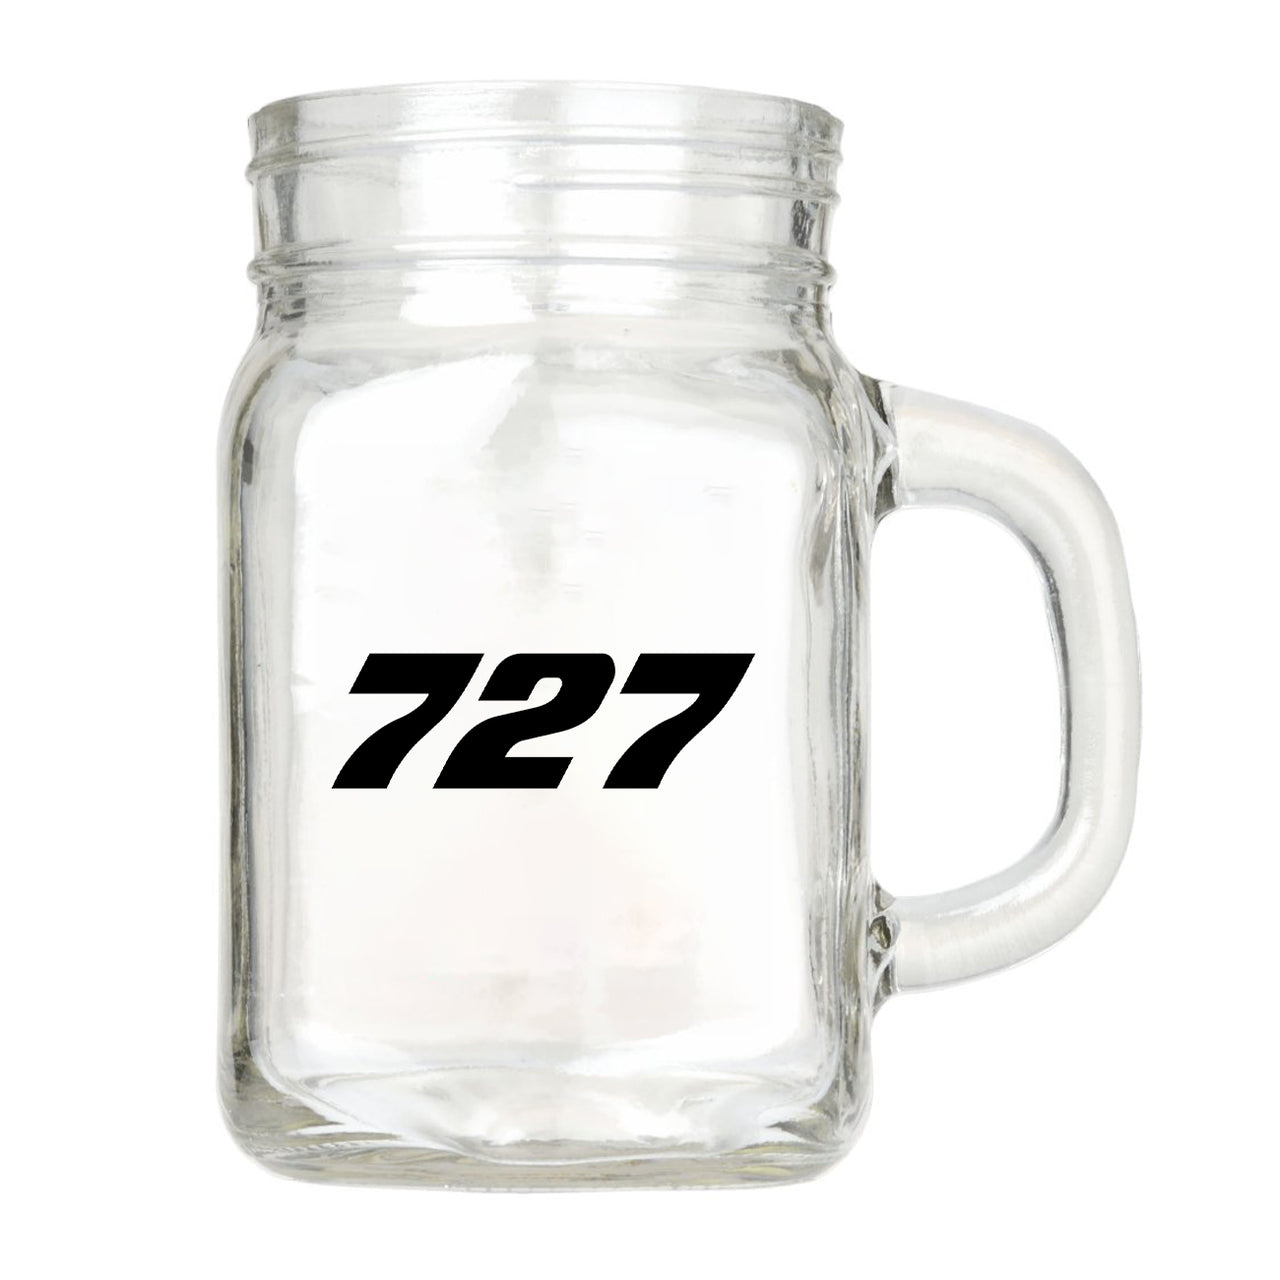 727 Flat Text Designed Cocktail Glasses